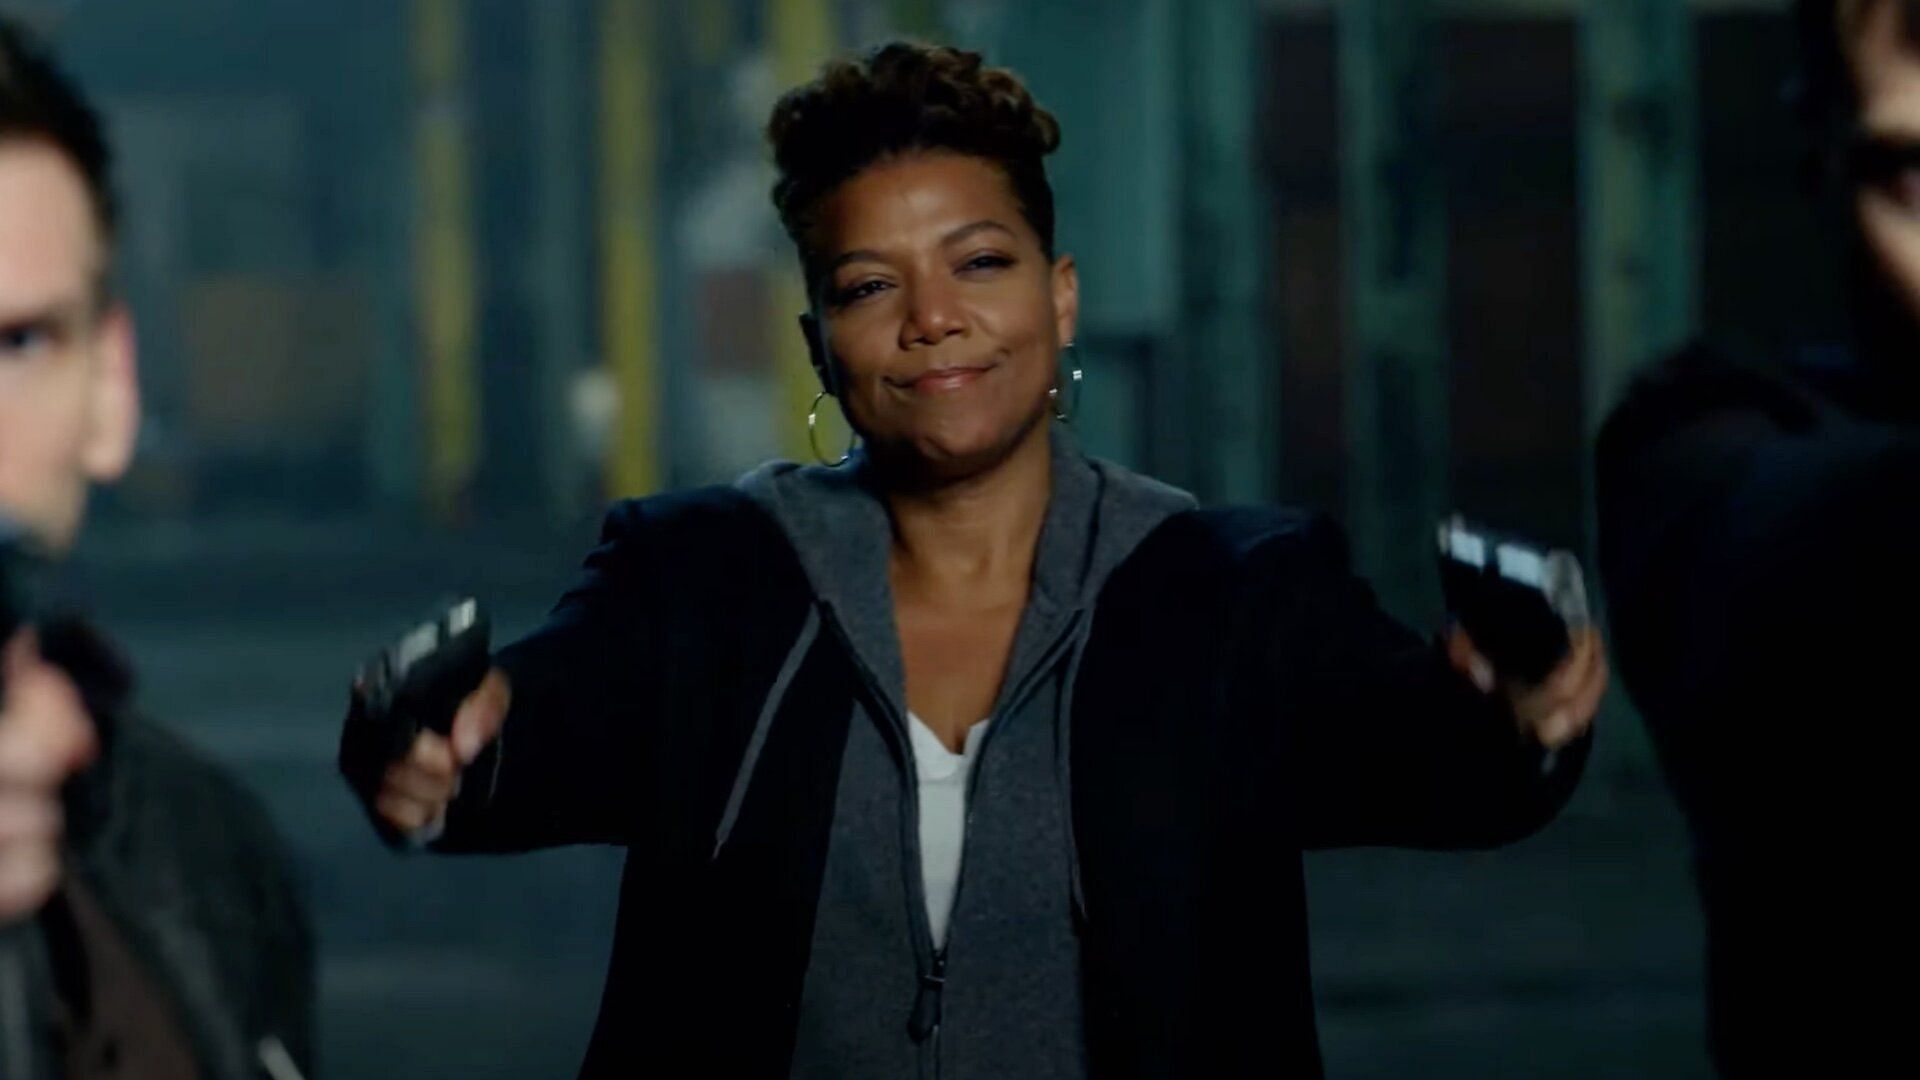 Queen Latifah in The Equalizer (Image via CBS)